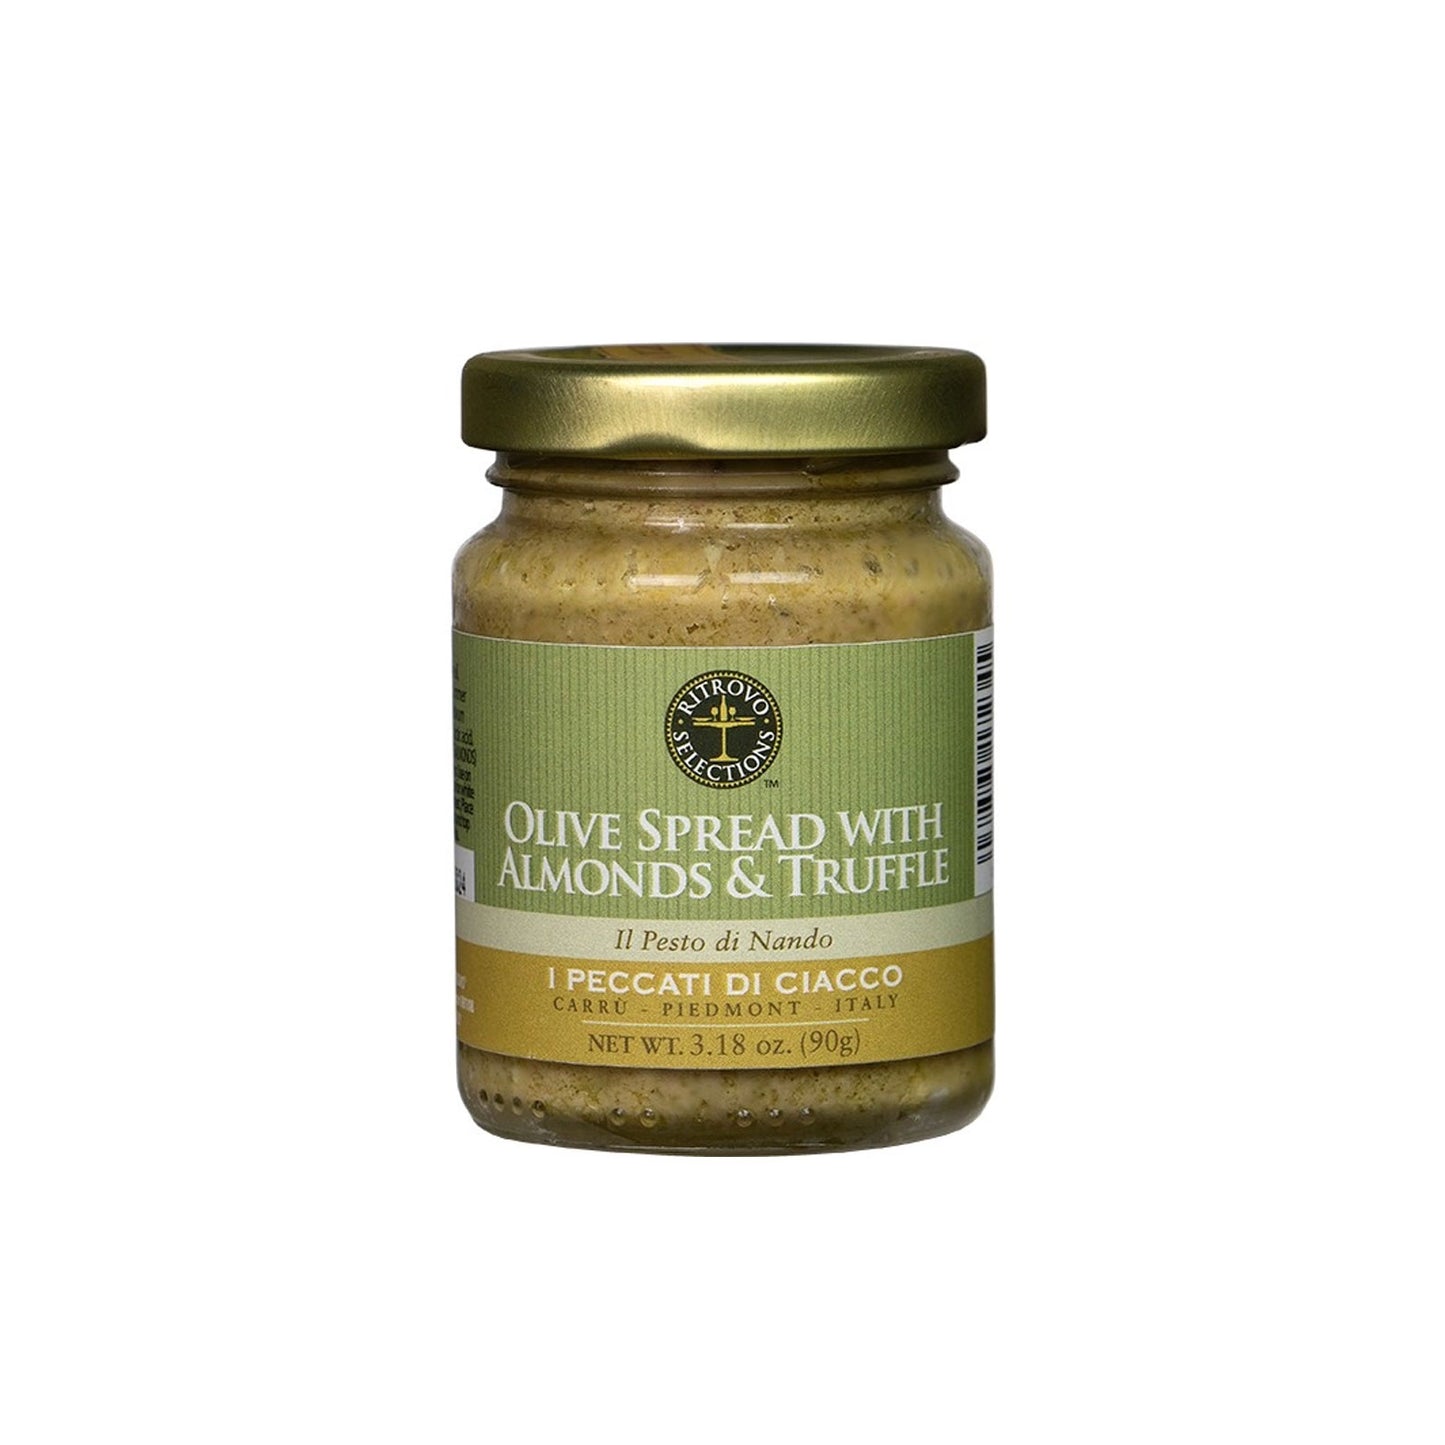 Olive Spread with Almonds & Truffle